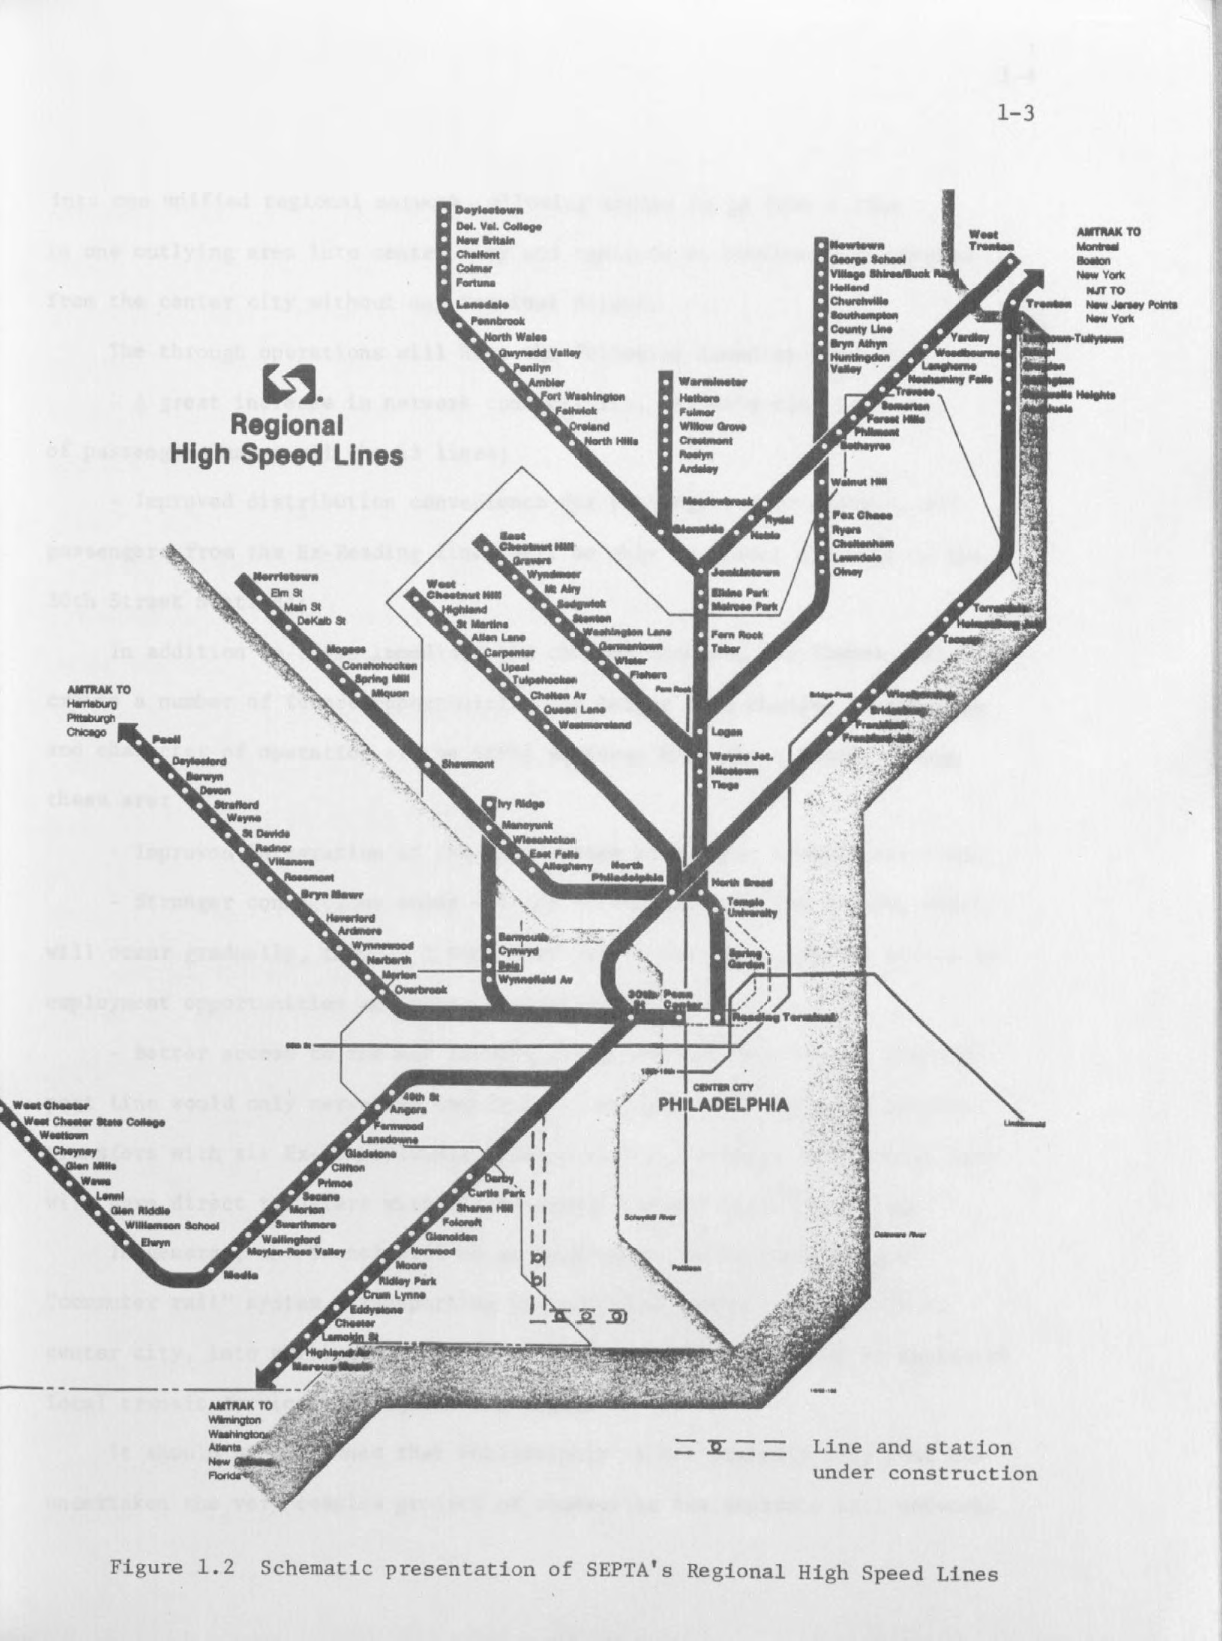 1984 General Operations Plan for the SEPTA Regional High Speed System